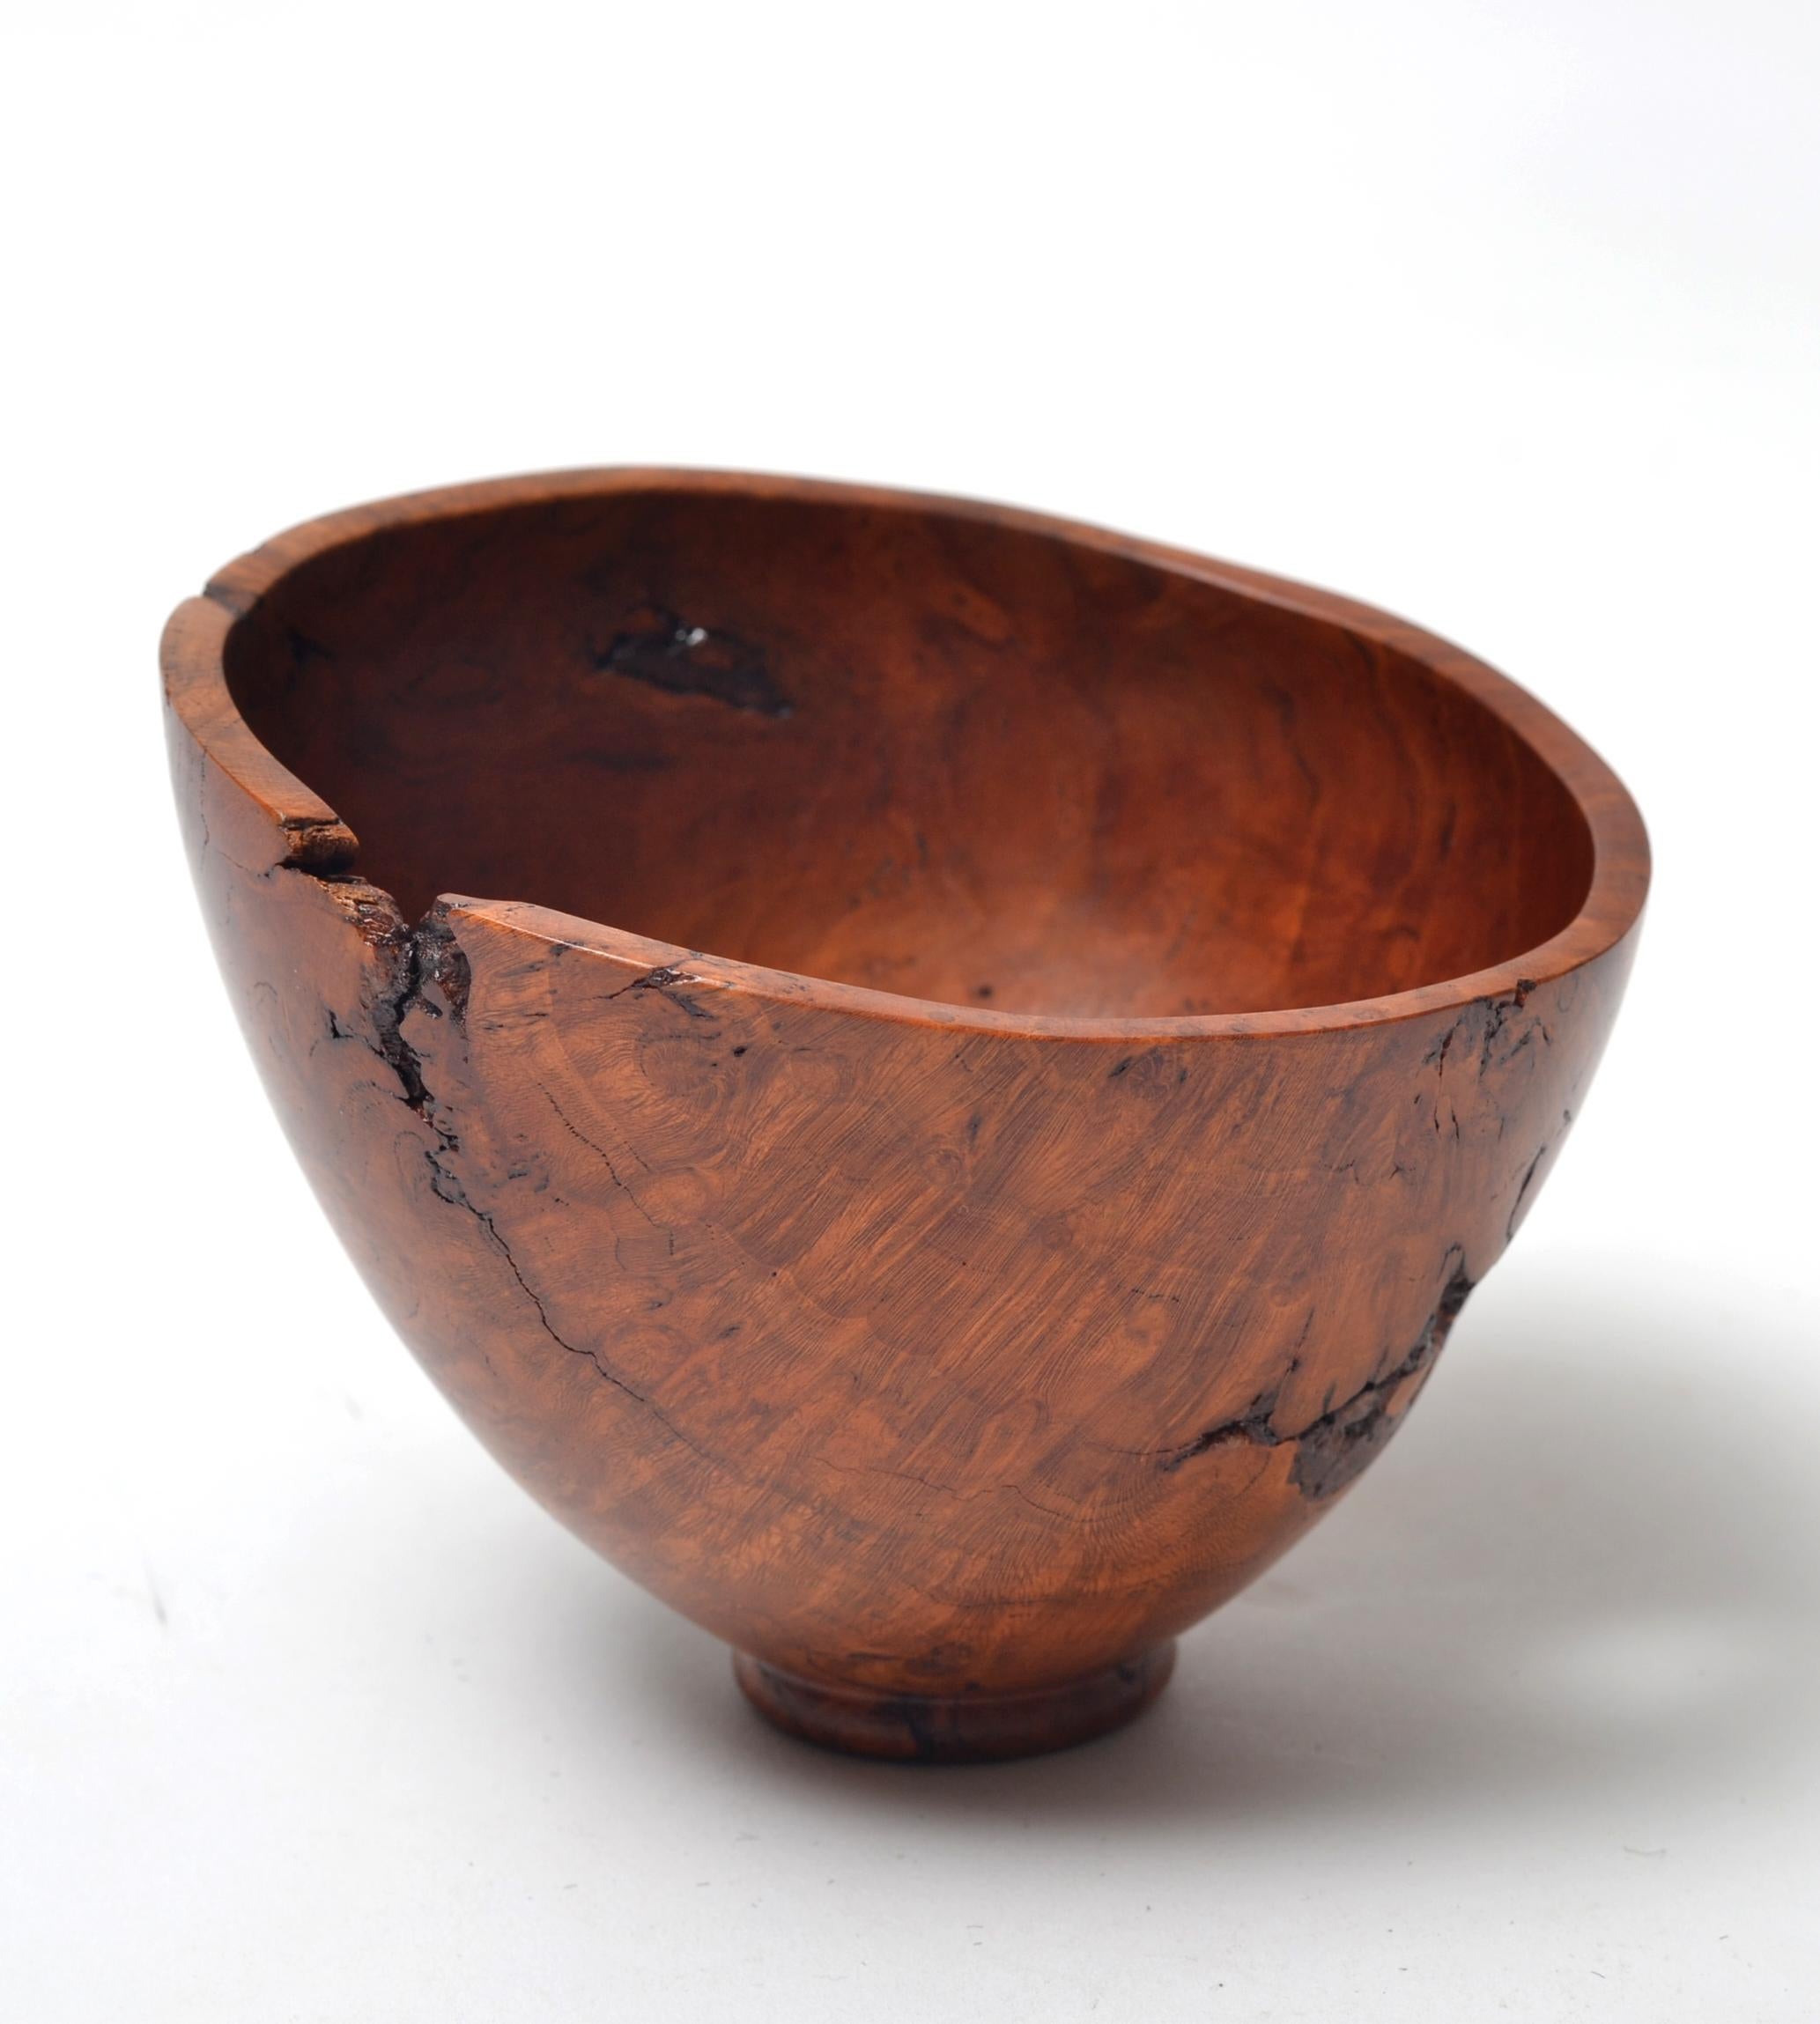 A beautiful, signed decorative wooden vessel form by renowned woodworker Dustin Coates.